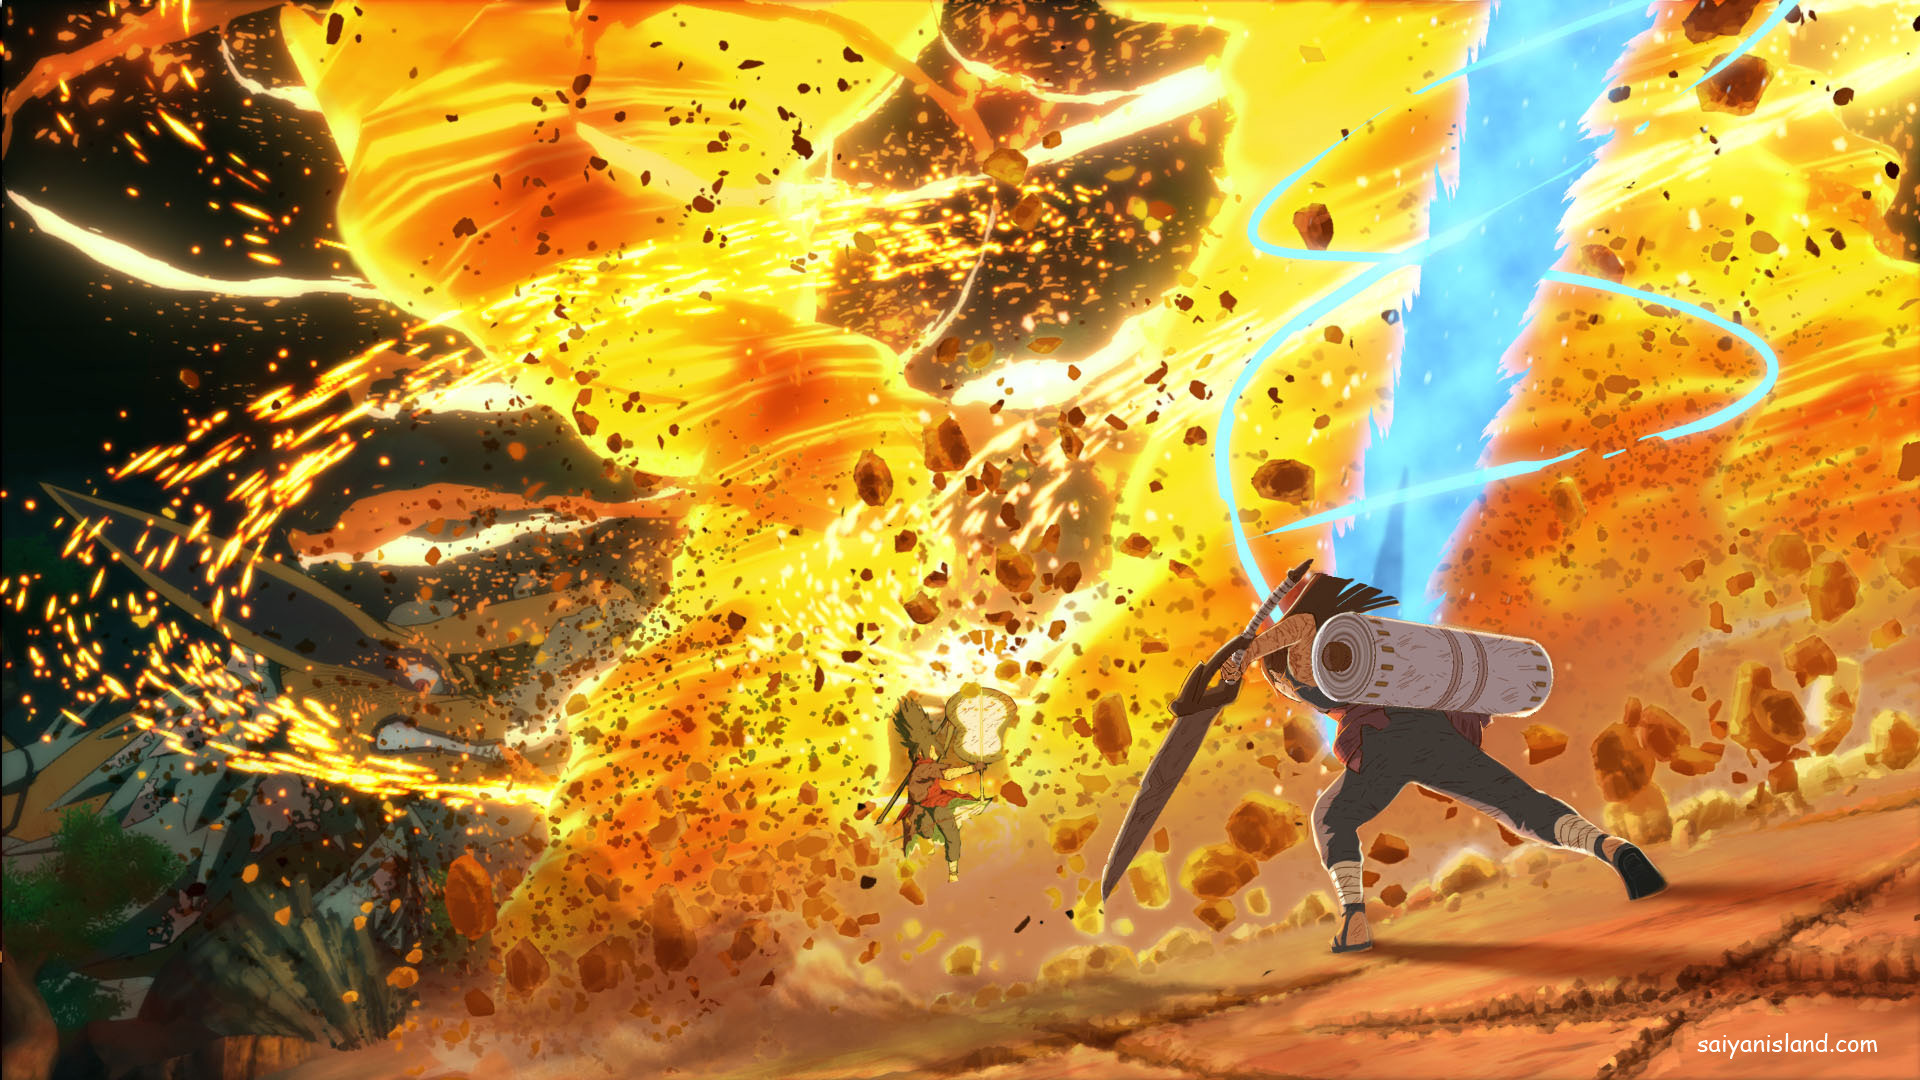 1920x1080 This image is just wallpaper worthy. - Naruto Shippuden: Ultimate Ninja  Storm 4 Message Board for PlayStation 4 - GameFAQs